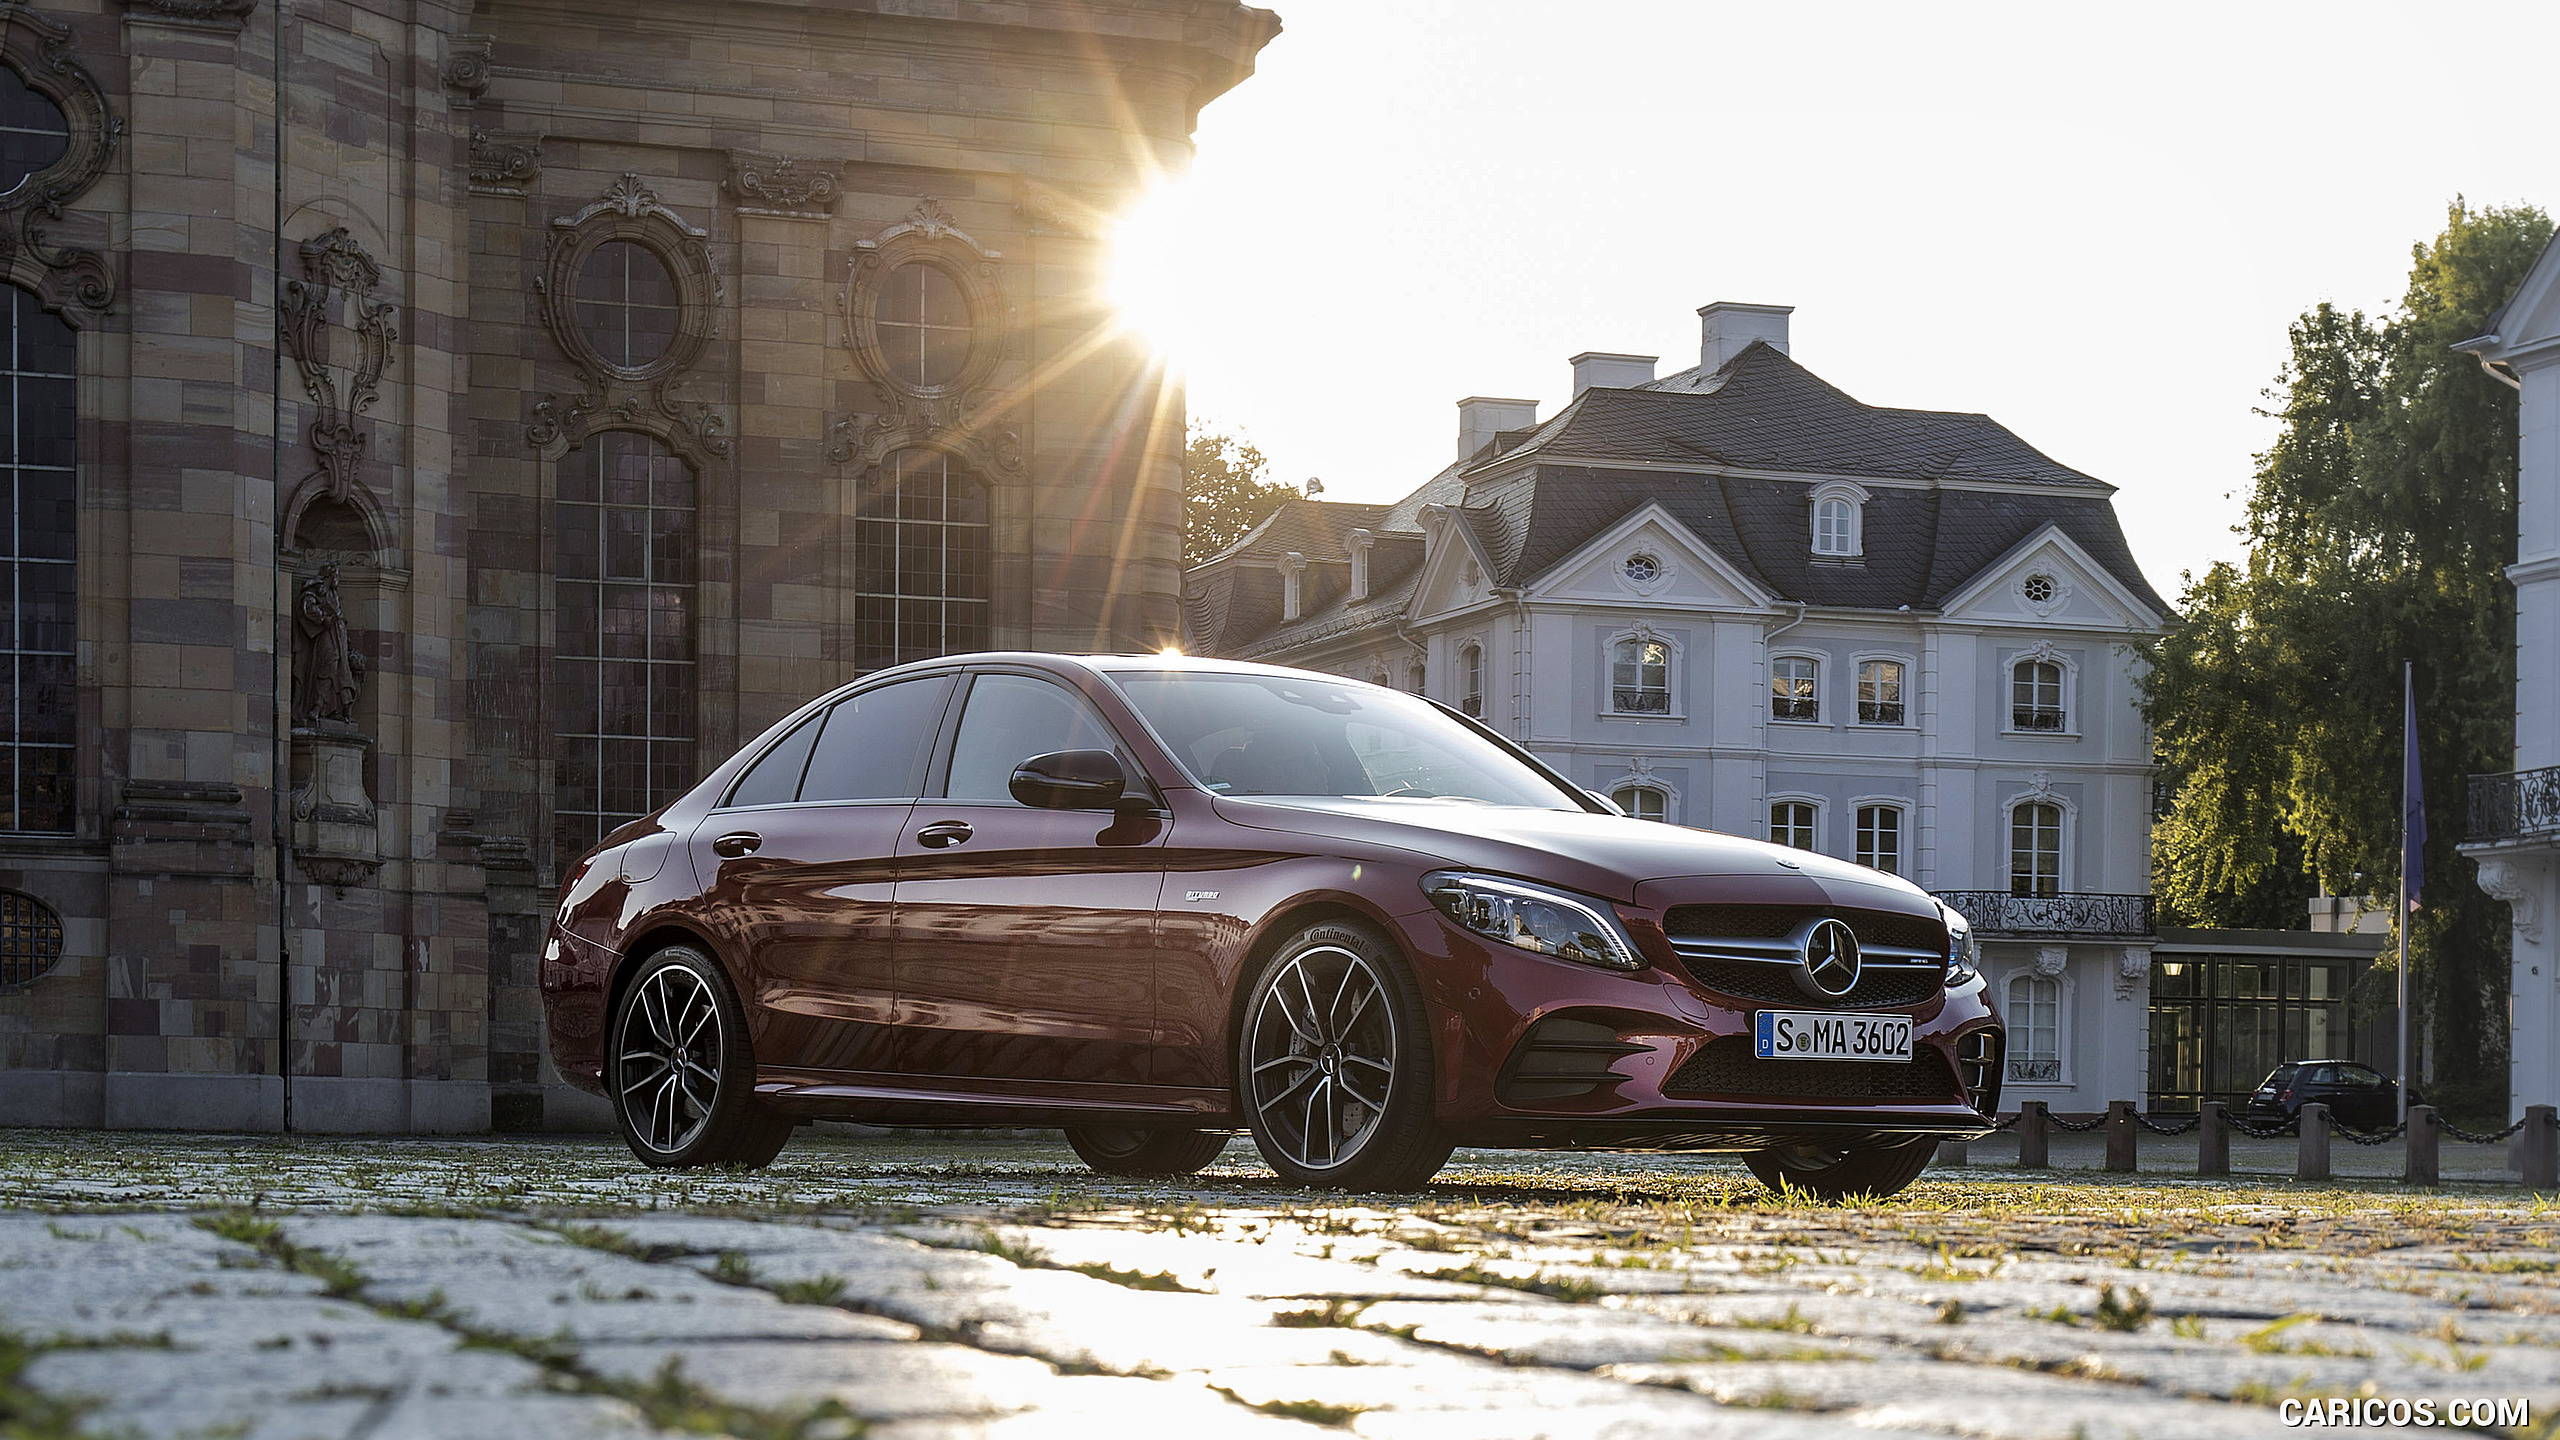 2019 Mercedes-AMG C43 4MATIC Sedan (Color: Hyacinth Red) - Front Three-Quarter, #58 of 192